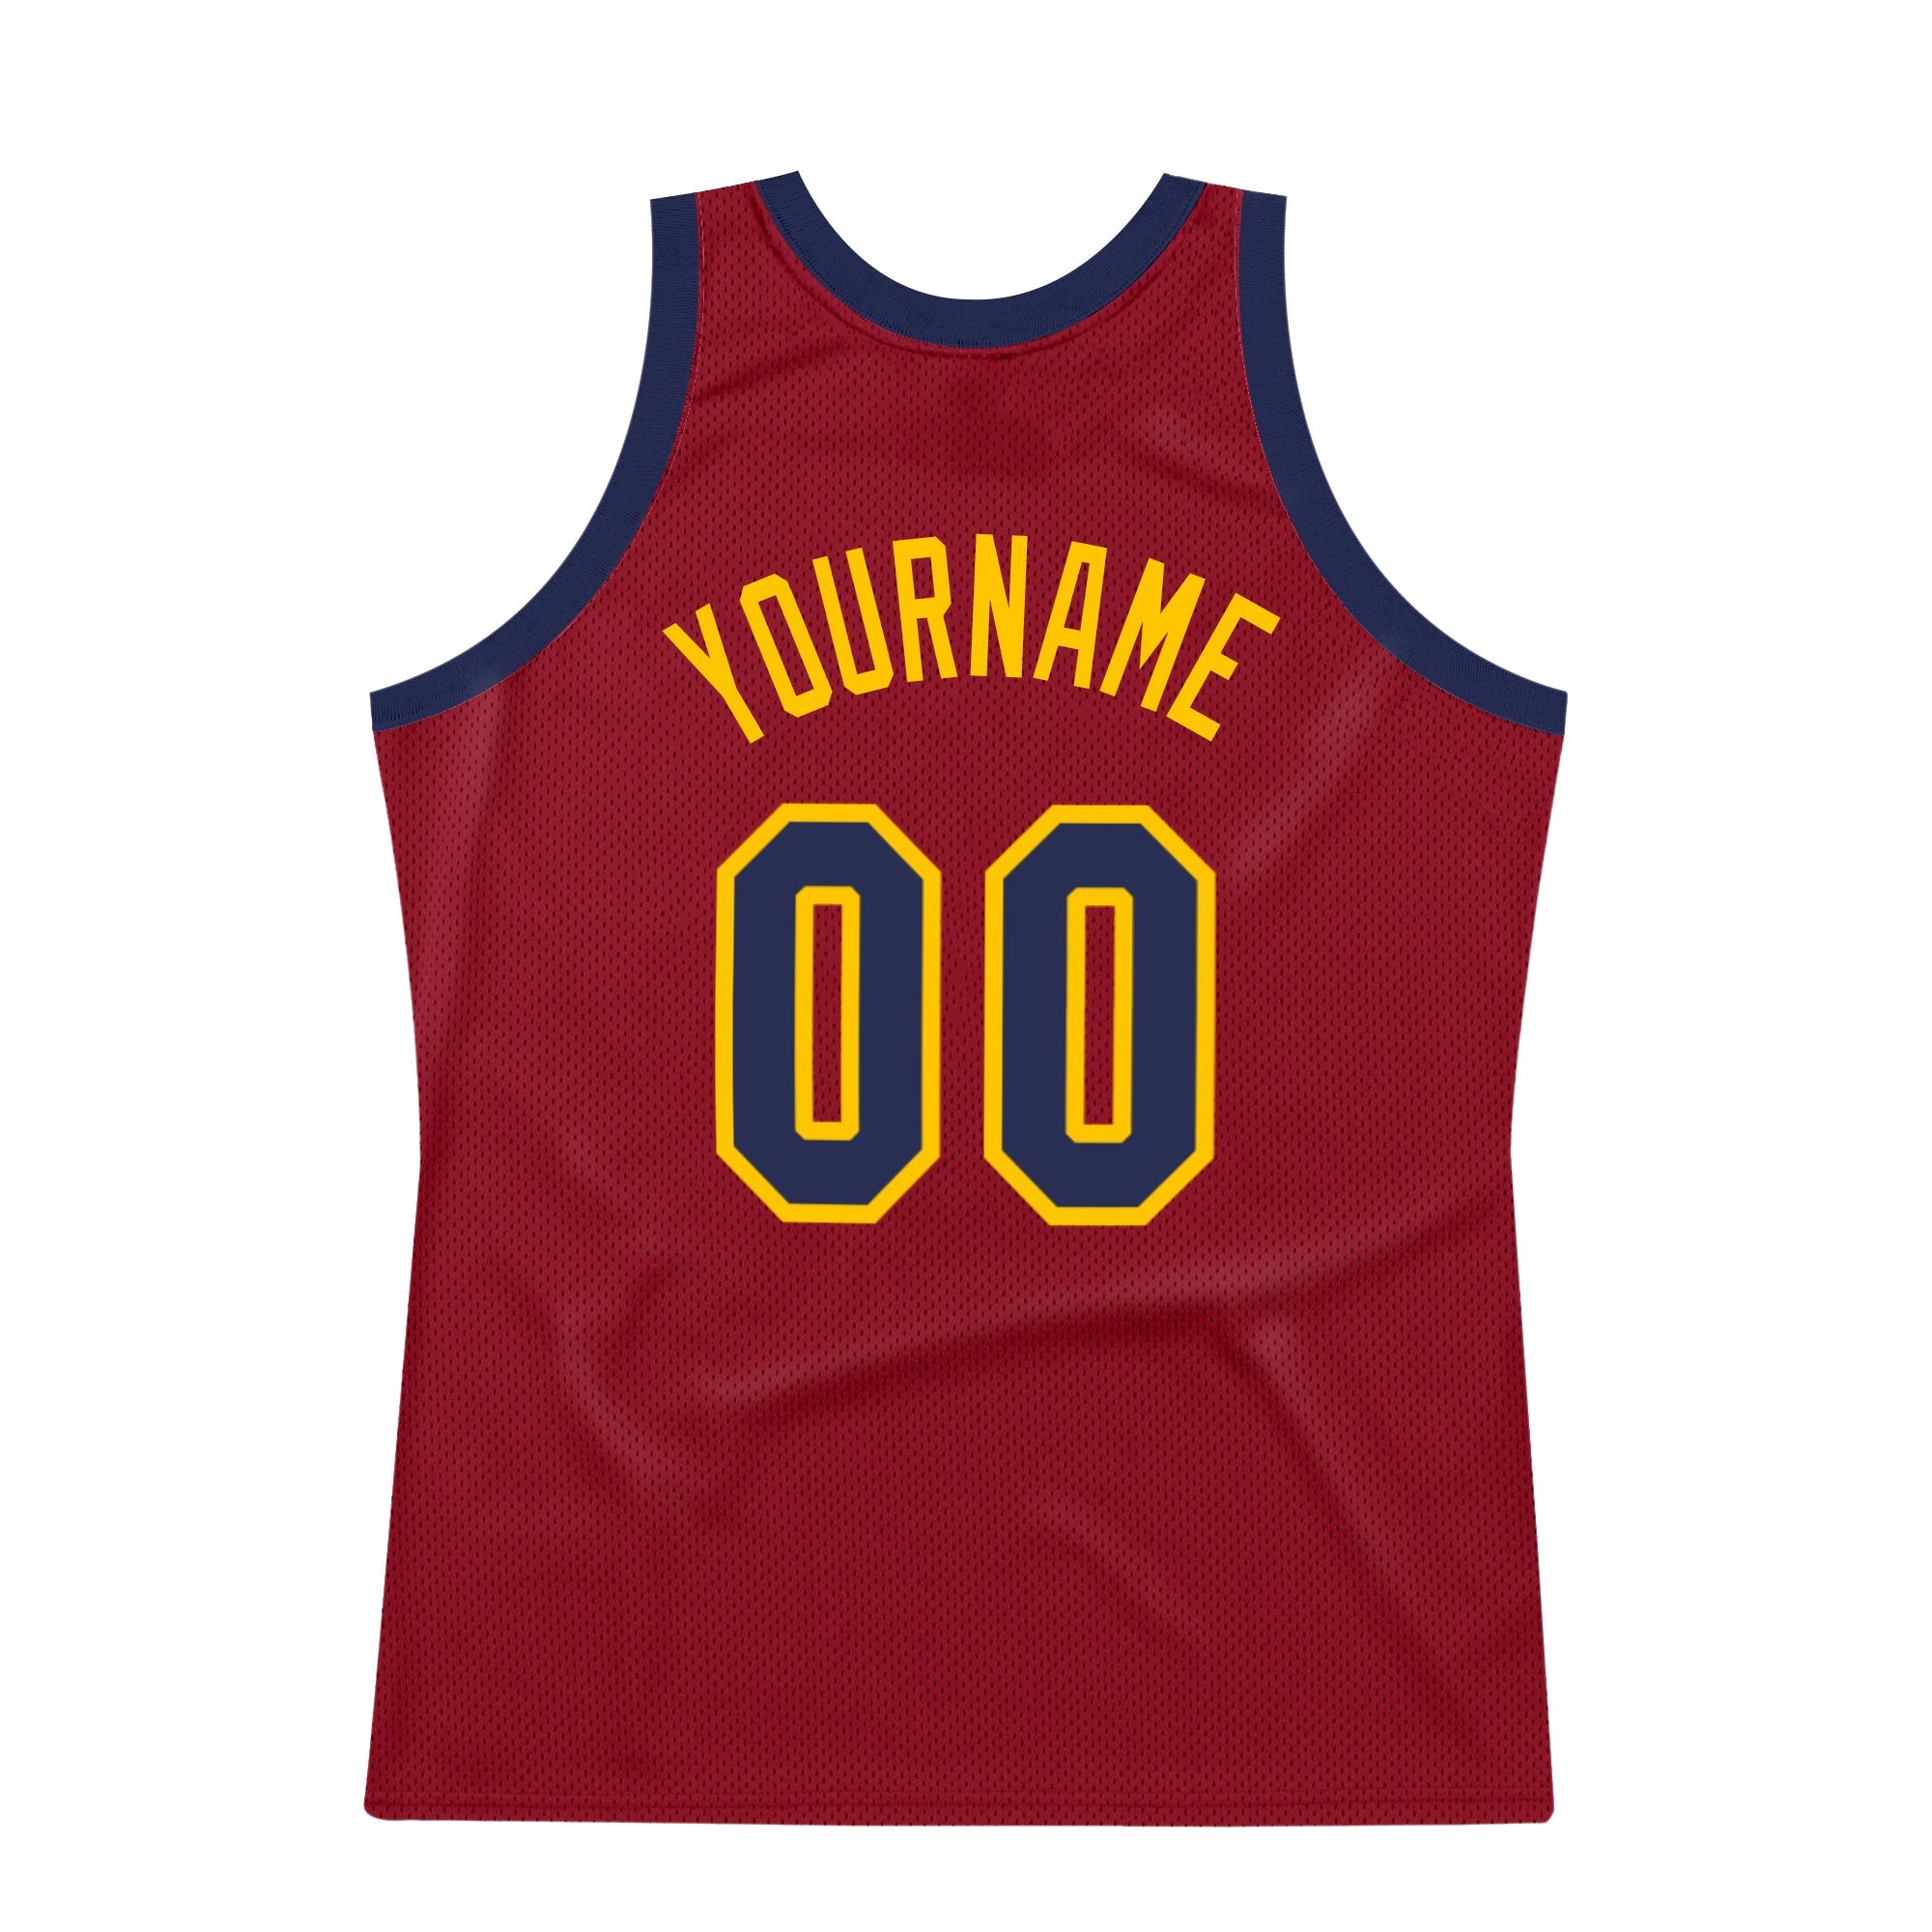 Custom Maroon Navy-Gold Authentic Throwback Basketball Jersey